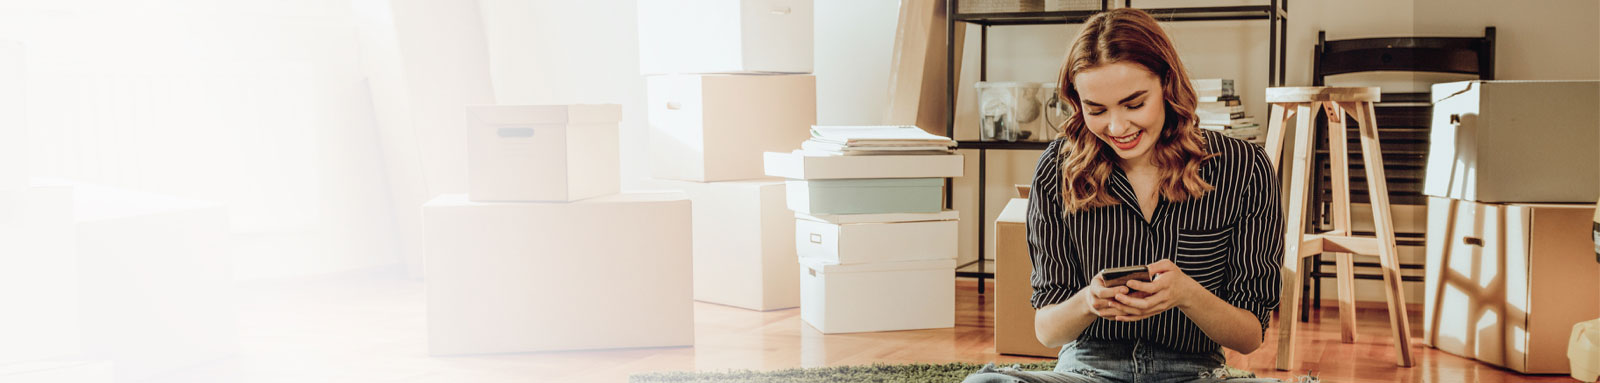 WOman moving to a new apartment with boxes